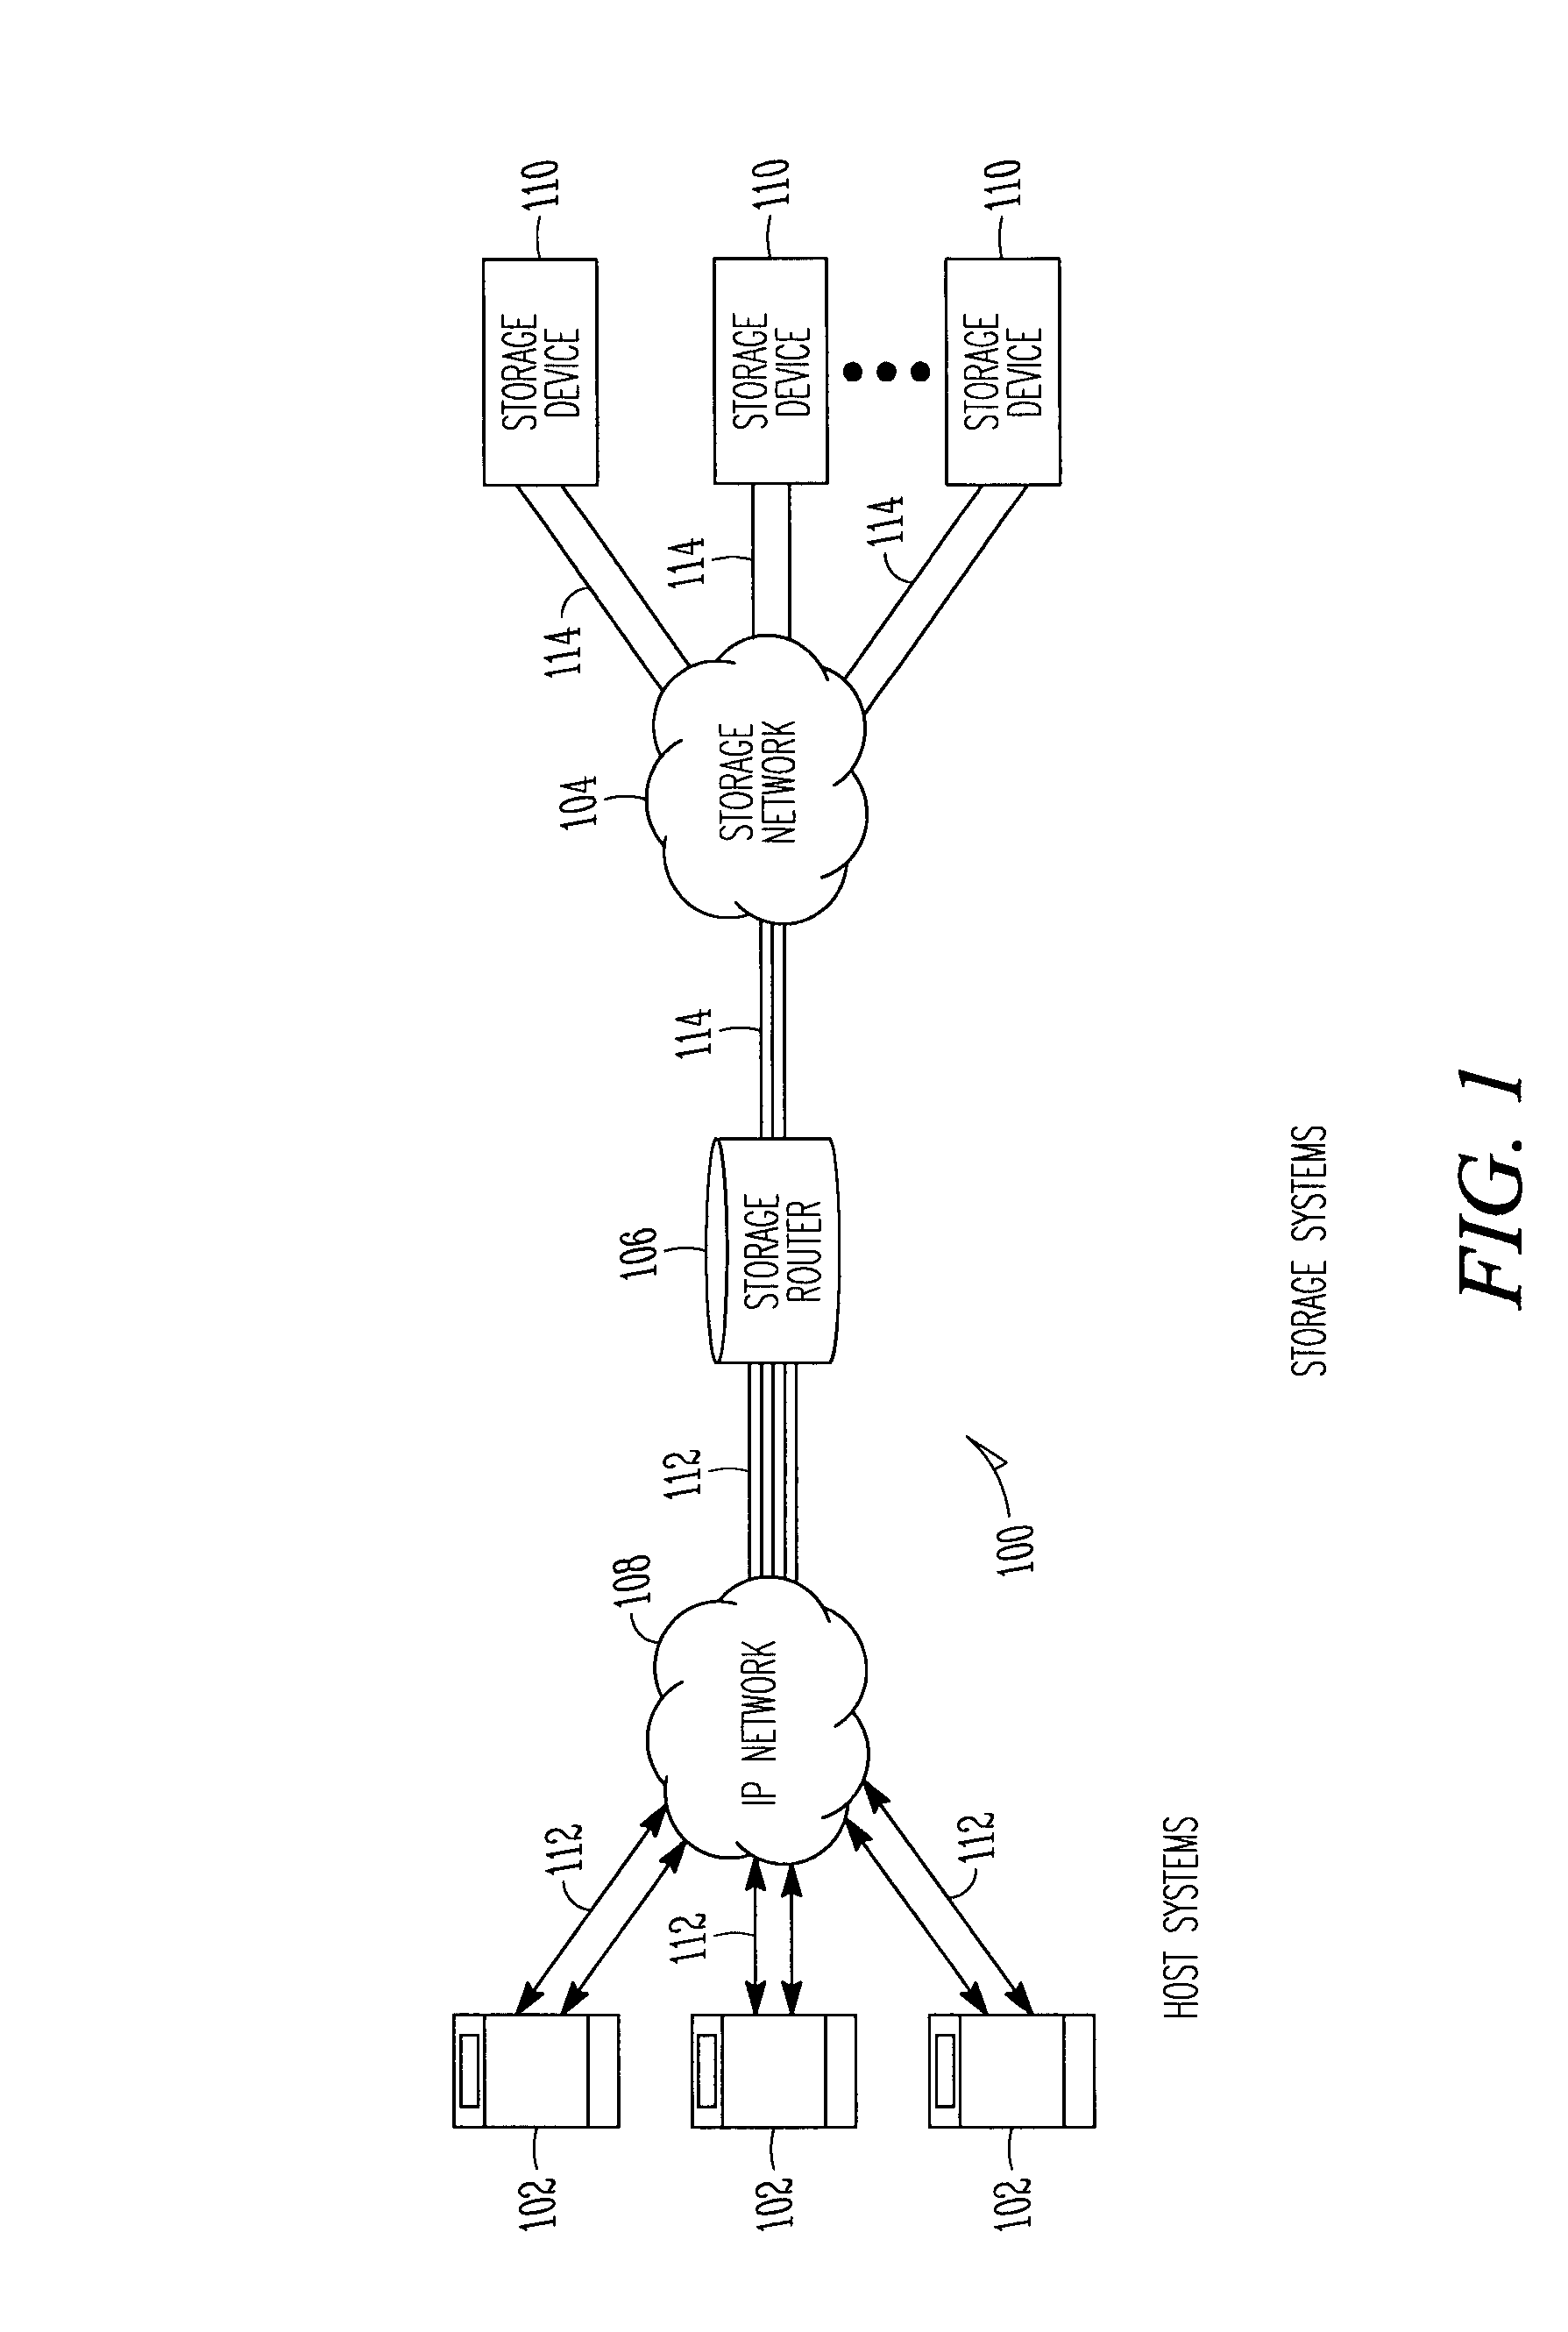 Storage router and method for routing IP datagrams between data path processors using a fibre channel switch